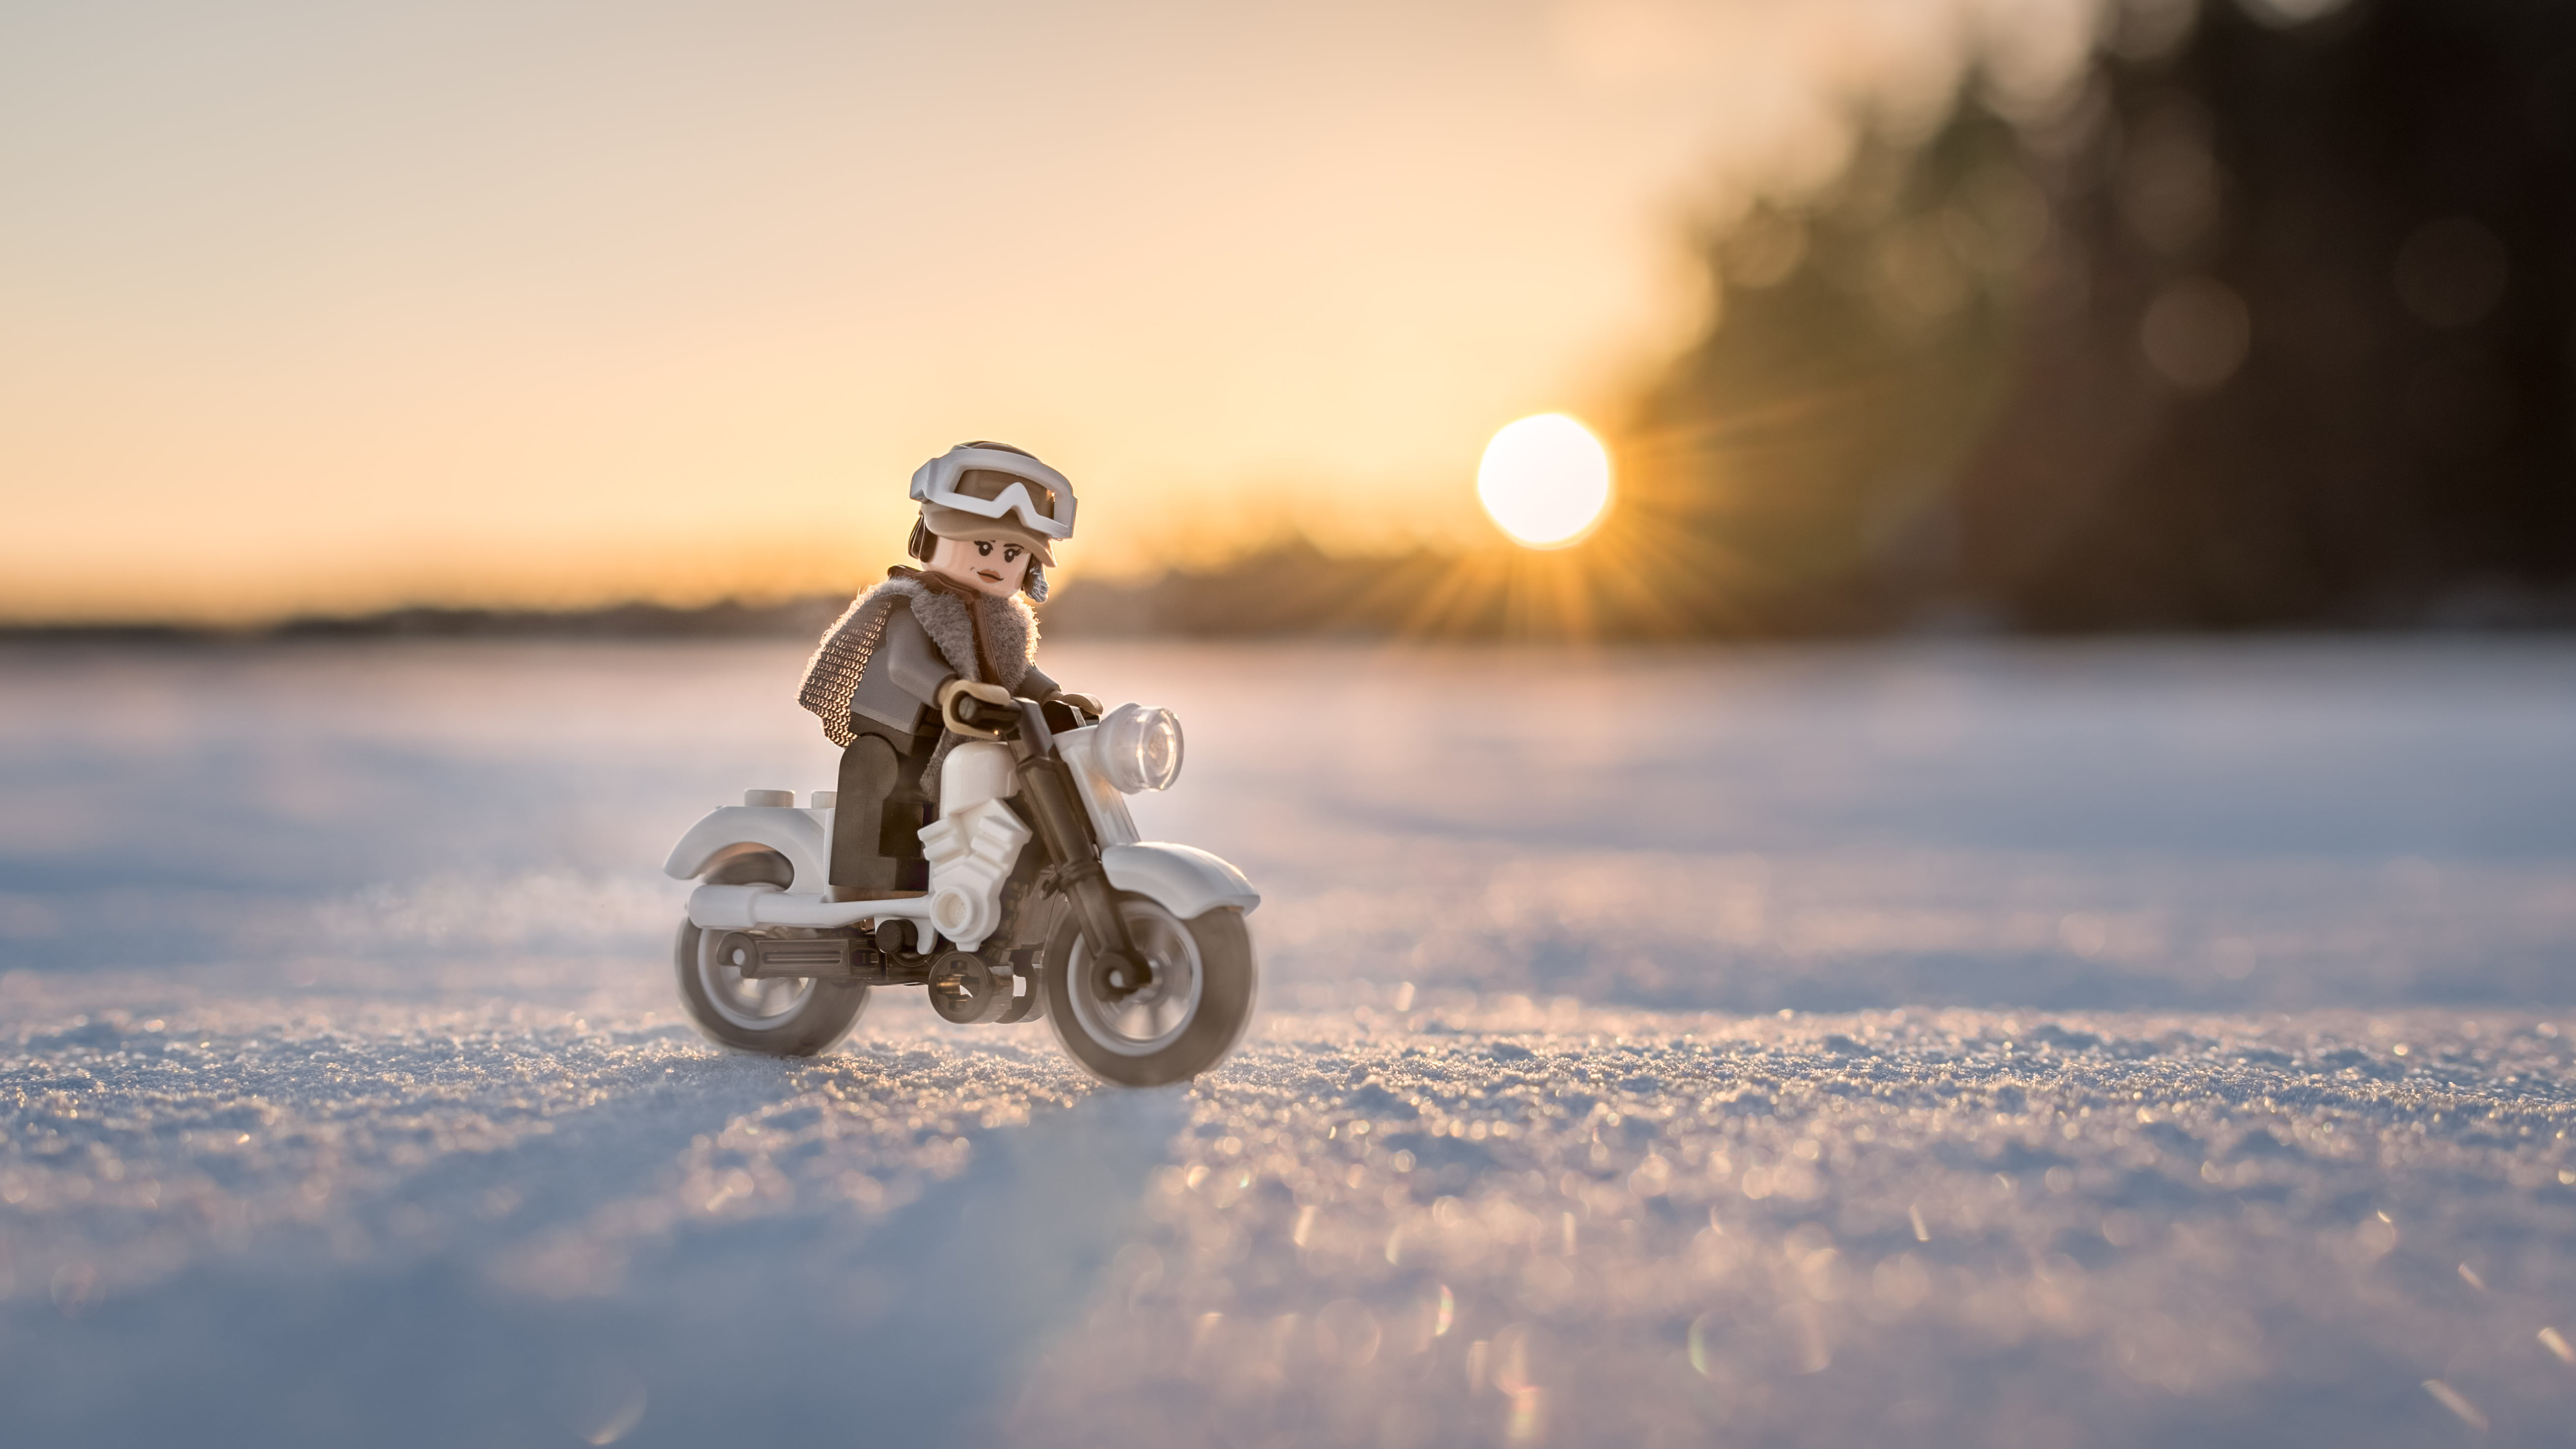 lego figure on person ridin motorcycle, Lake, 35mm, Bike, D500